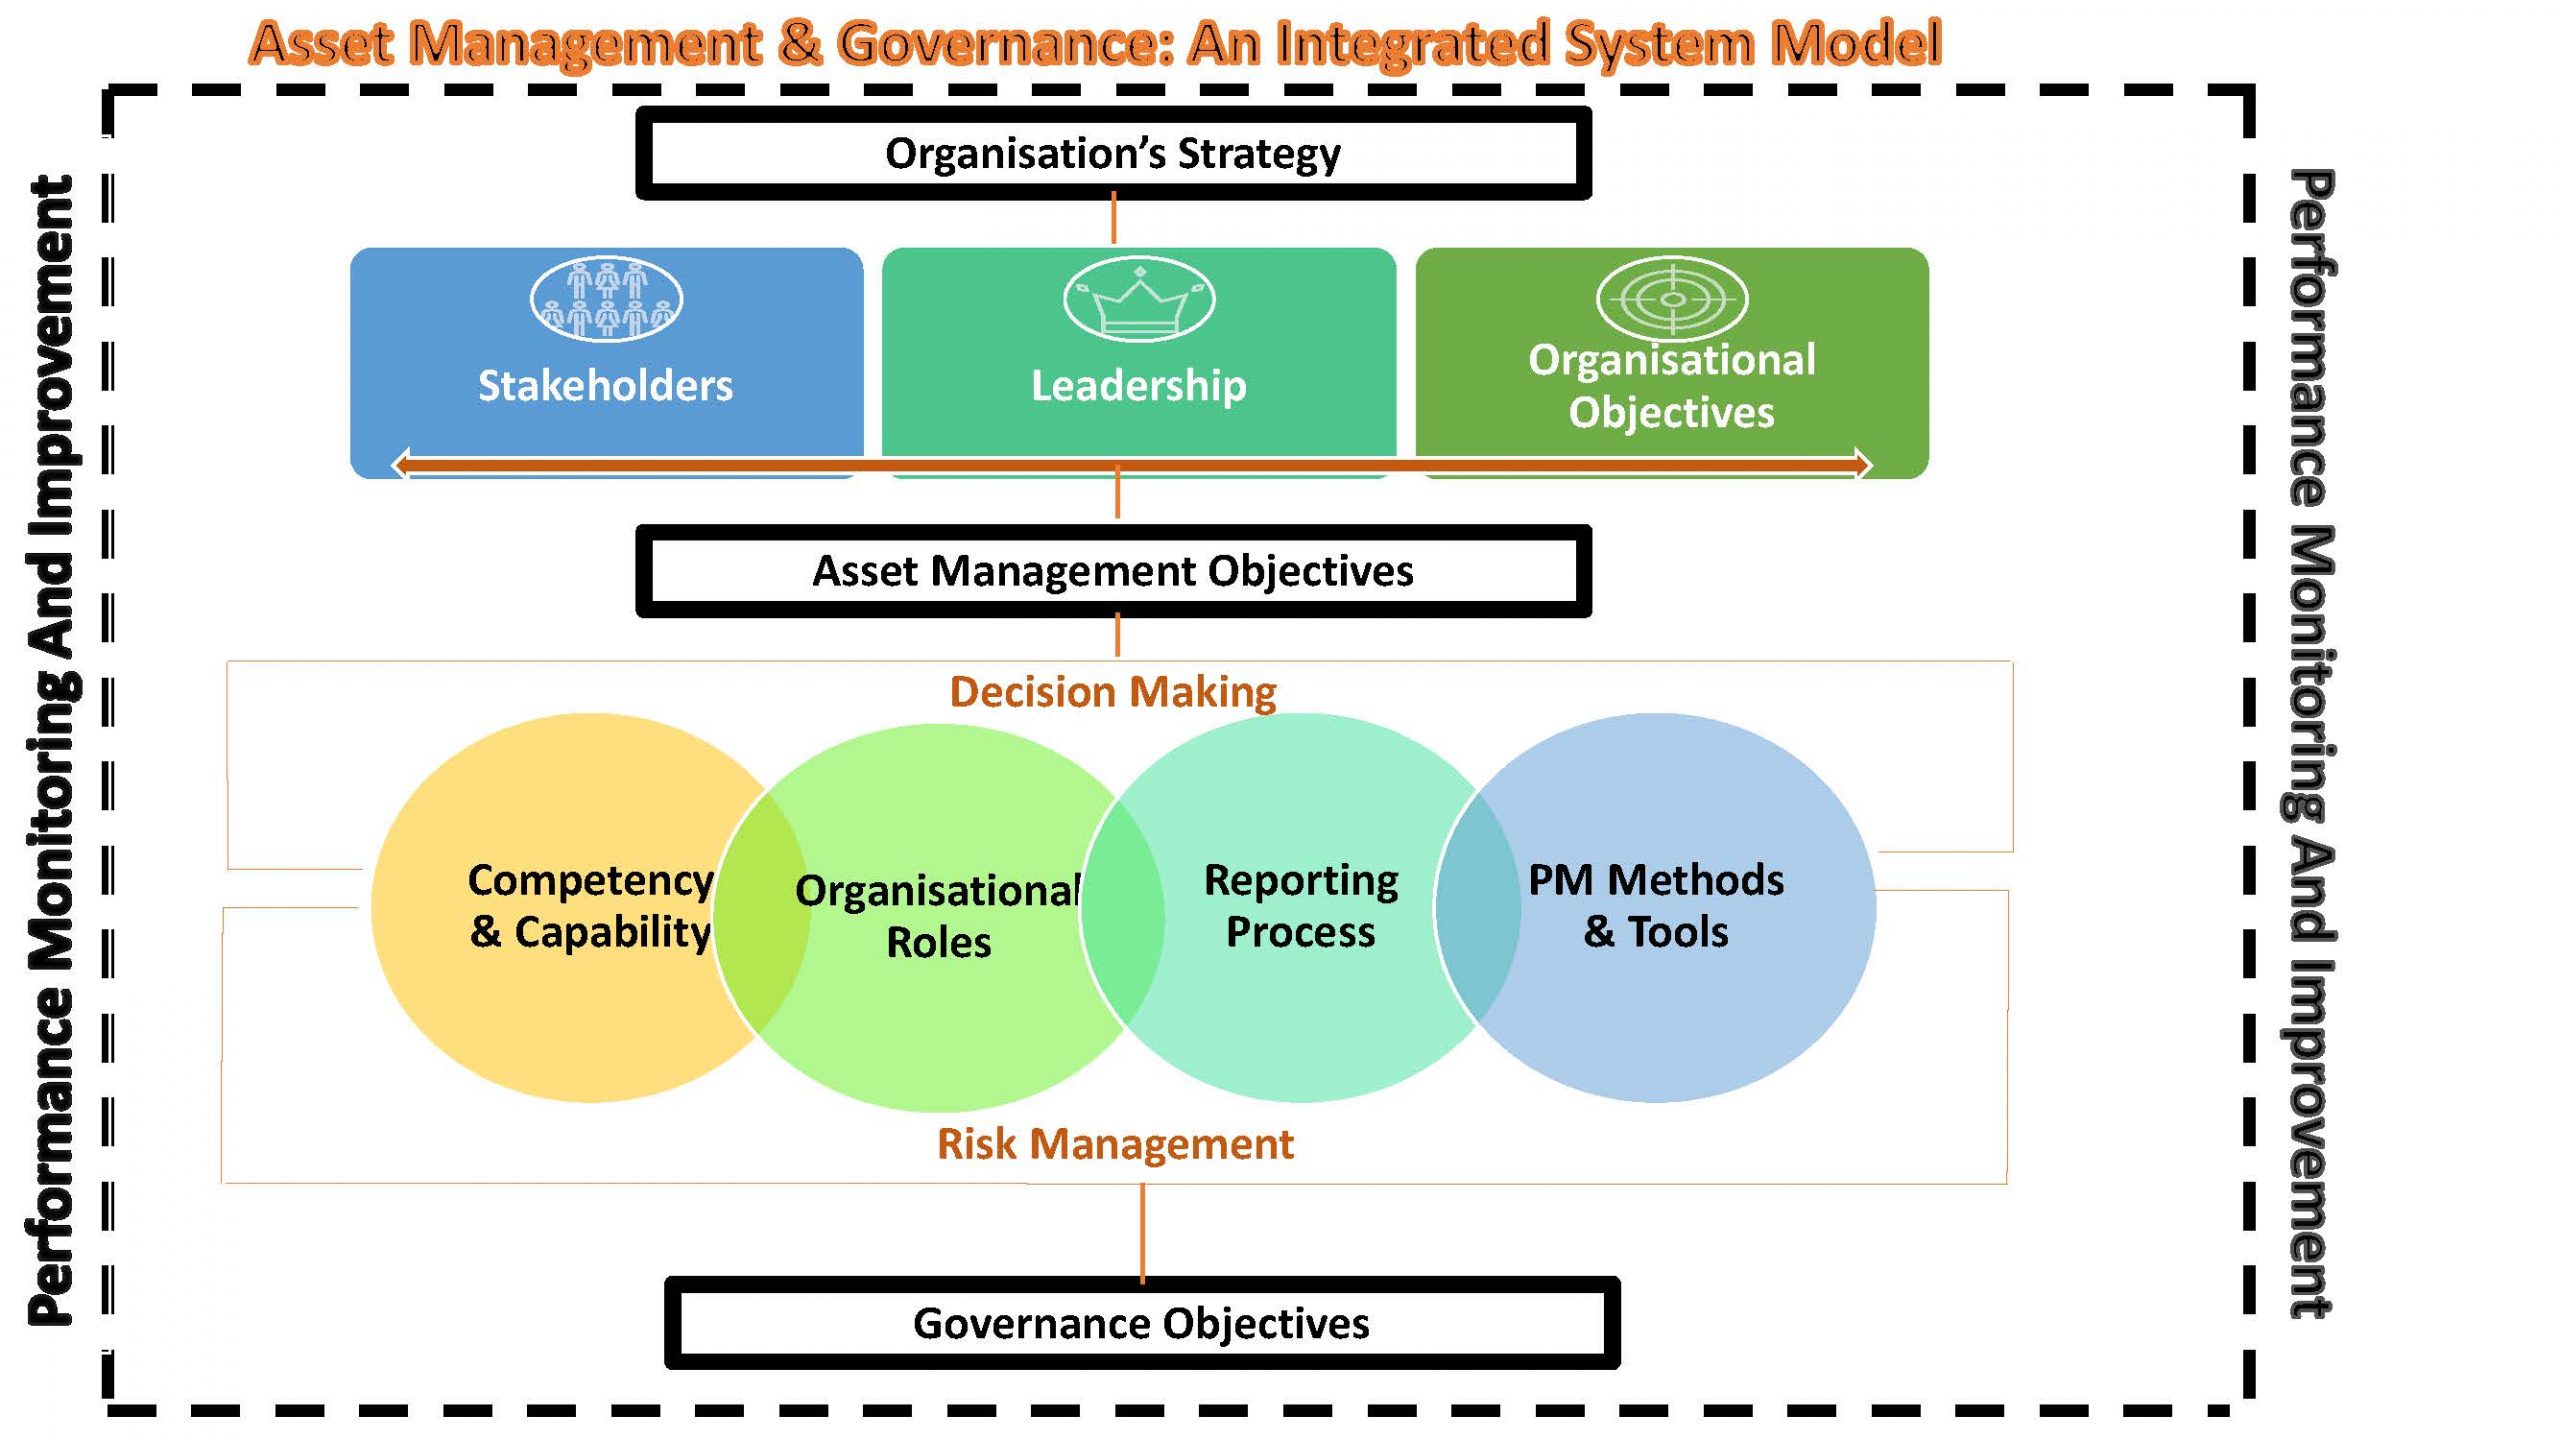 An integrative approach of asset management and Governance where an organisation’s strategy must be supported and enabled by their key stakeholders as well as a leadership that helps cultivate an organisation’s culture of integrity, leading to positive performance and sustainable asset life cycle management. Their asset and governance mechanisms must be aligned with the organisation’s objectives while empowering better decision making and long term strategic planning.